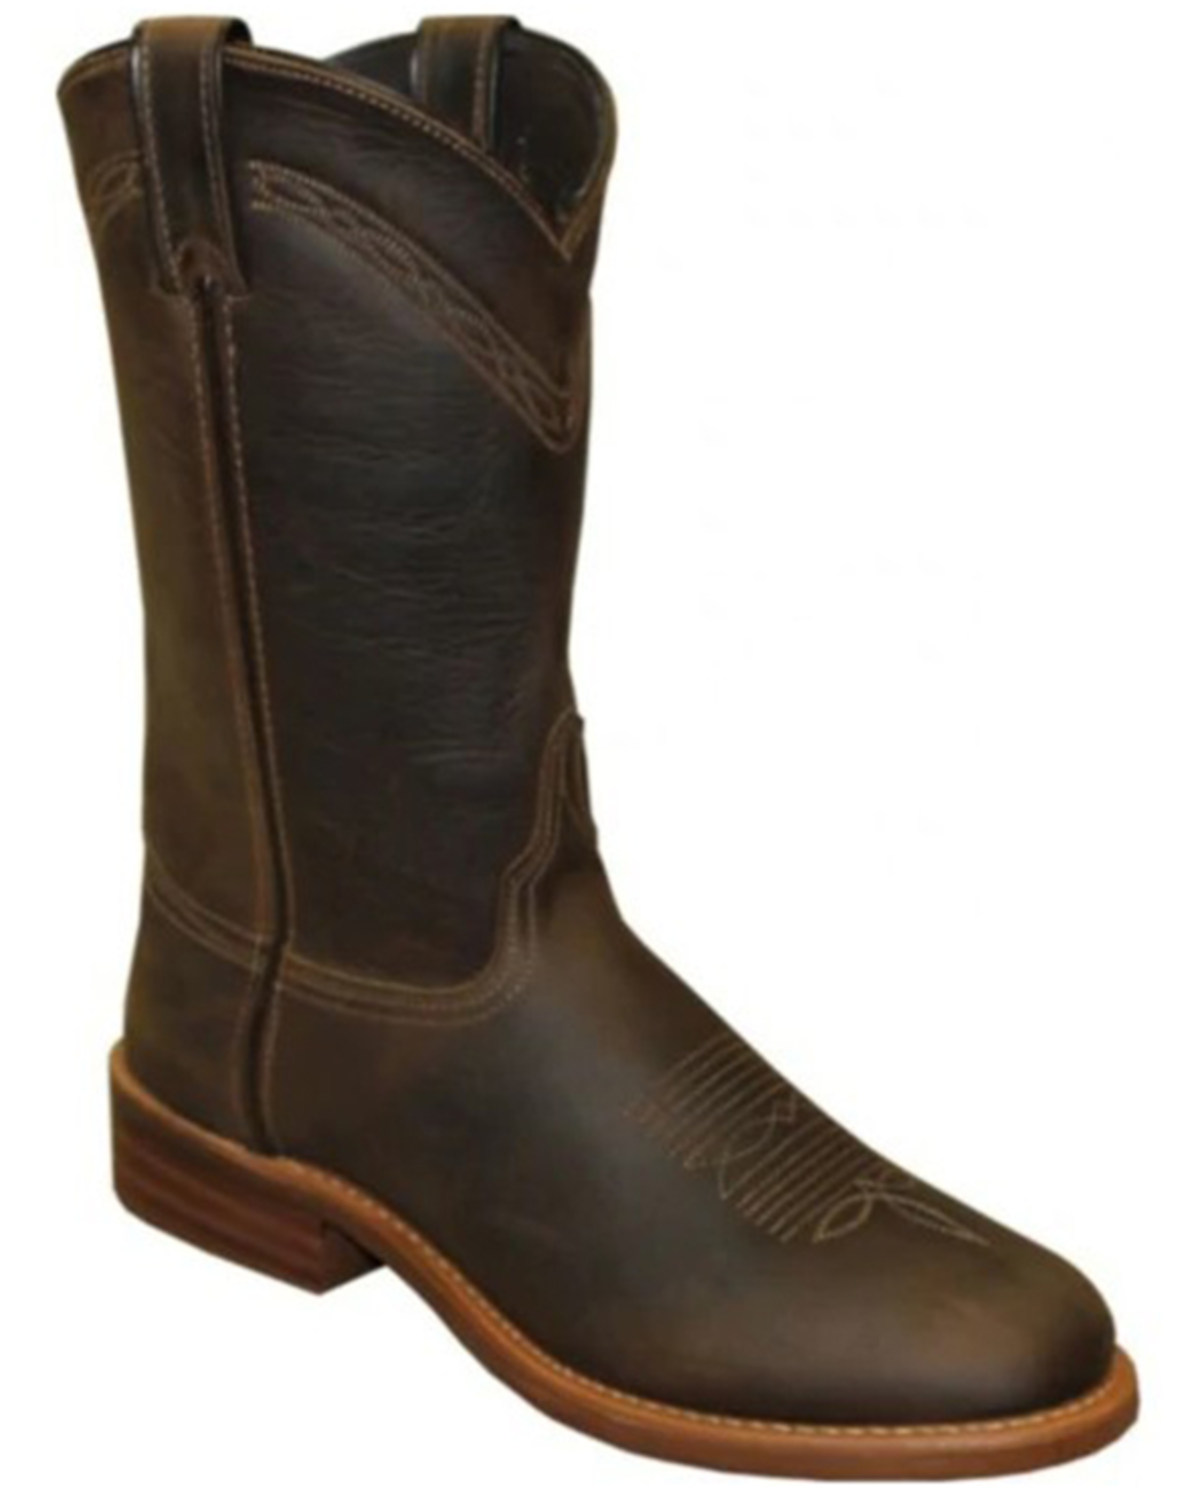 Abilene Men's Cowhide Leather Pull On Western Boot - Broad Round Toe